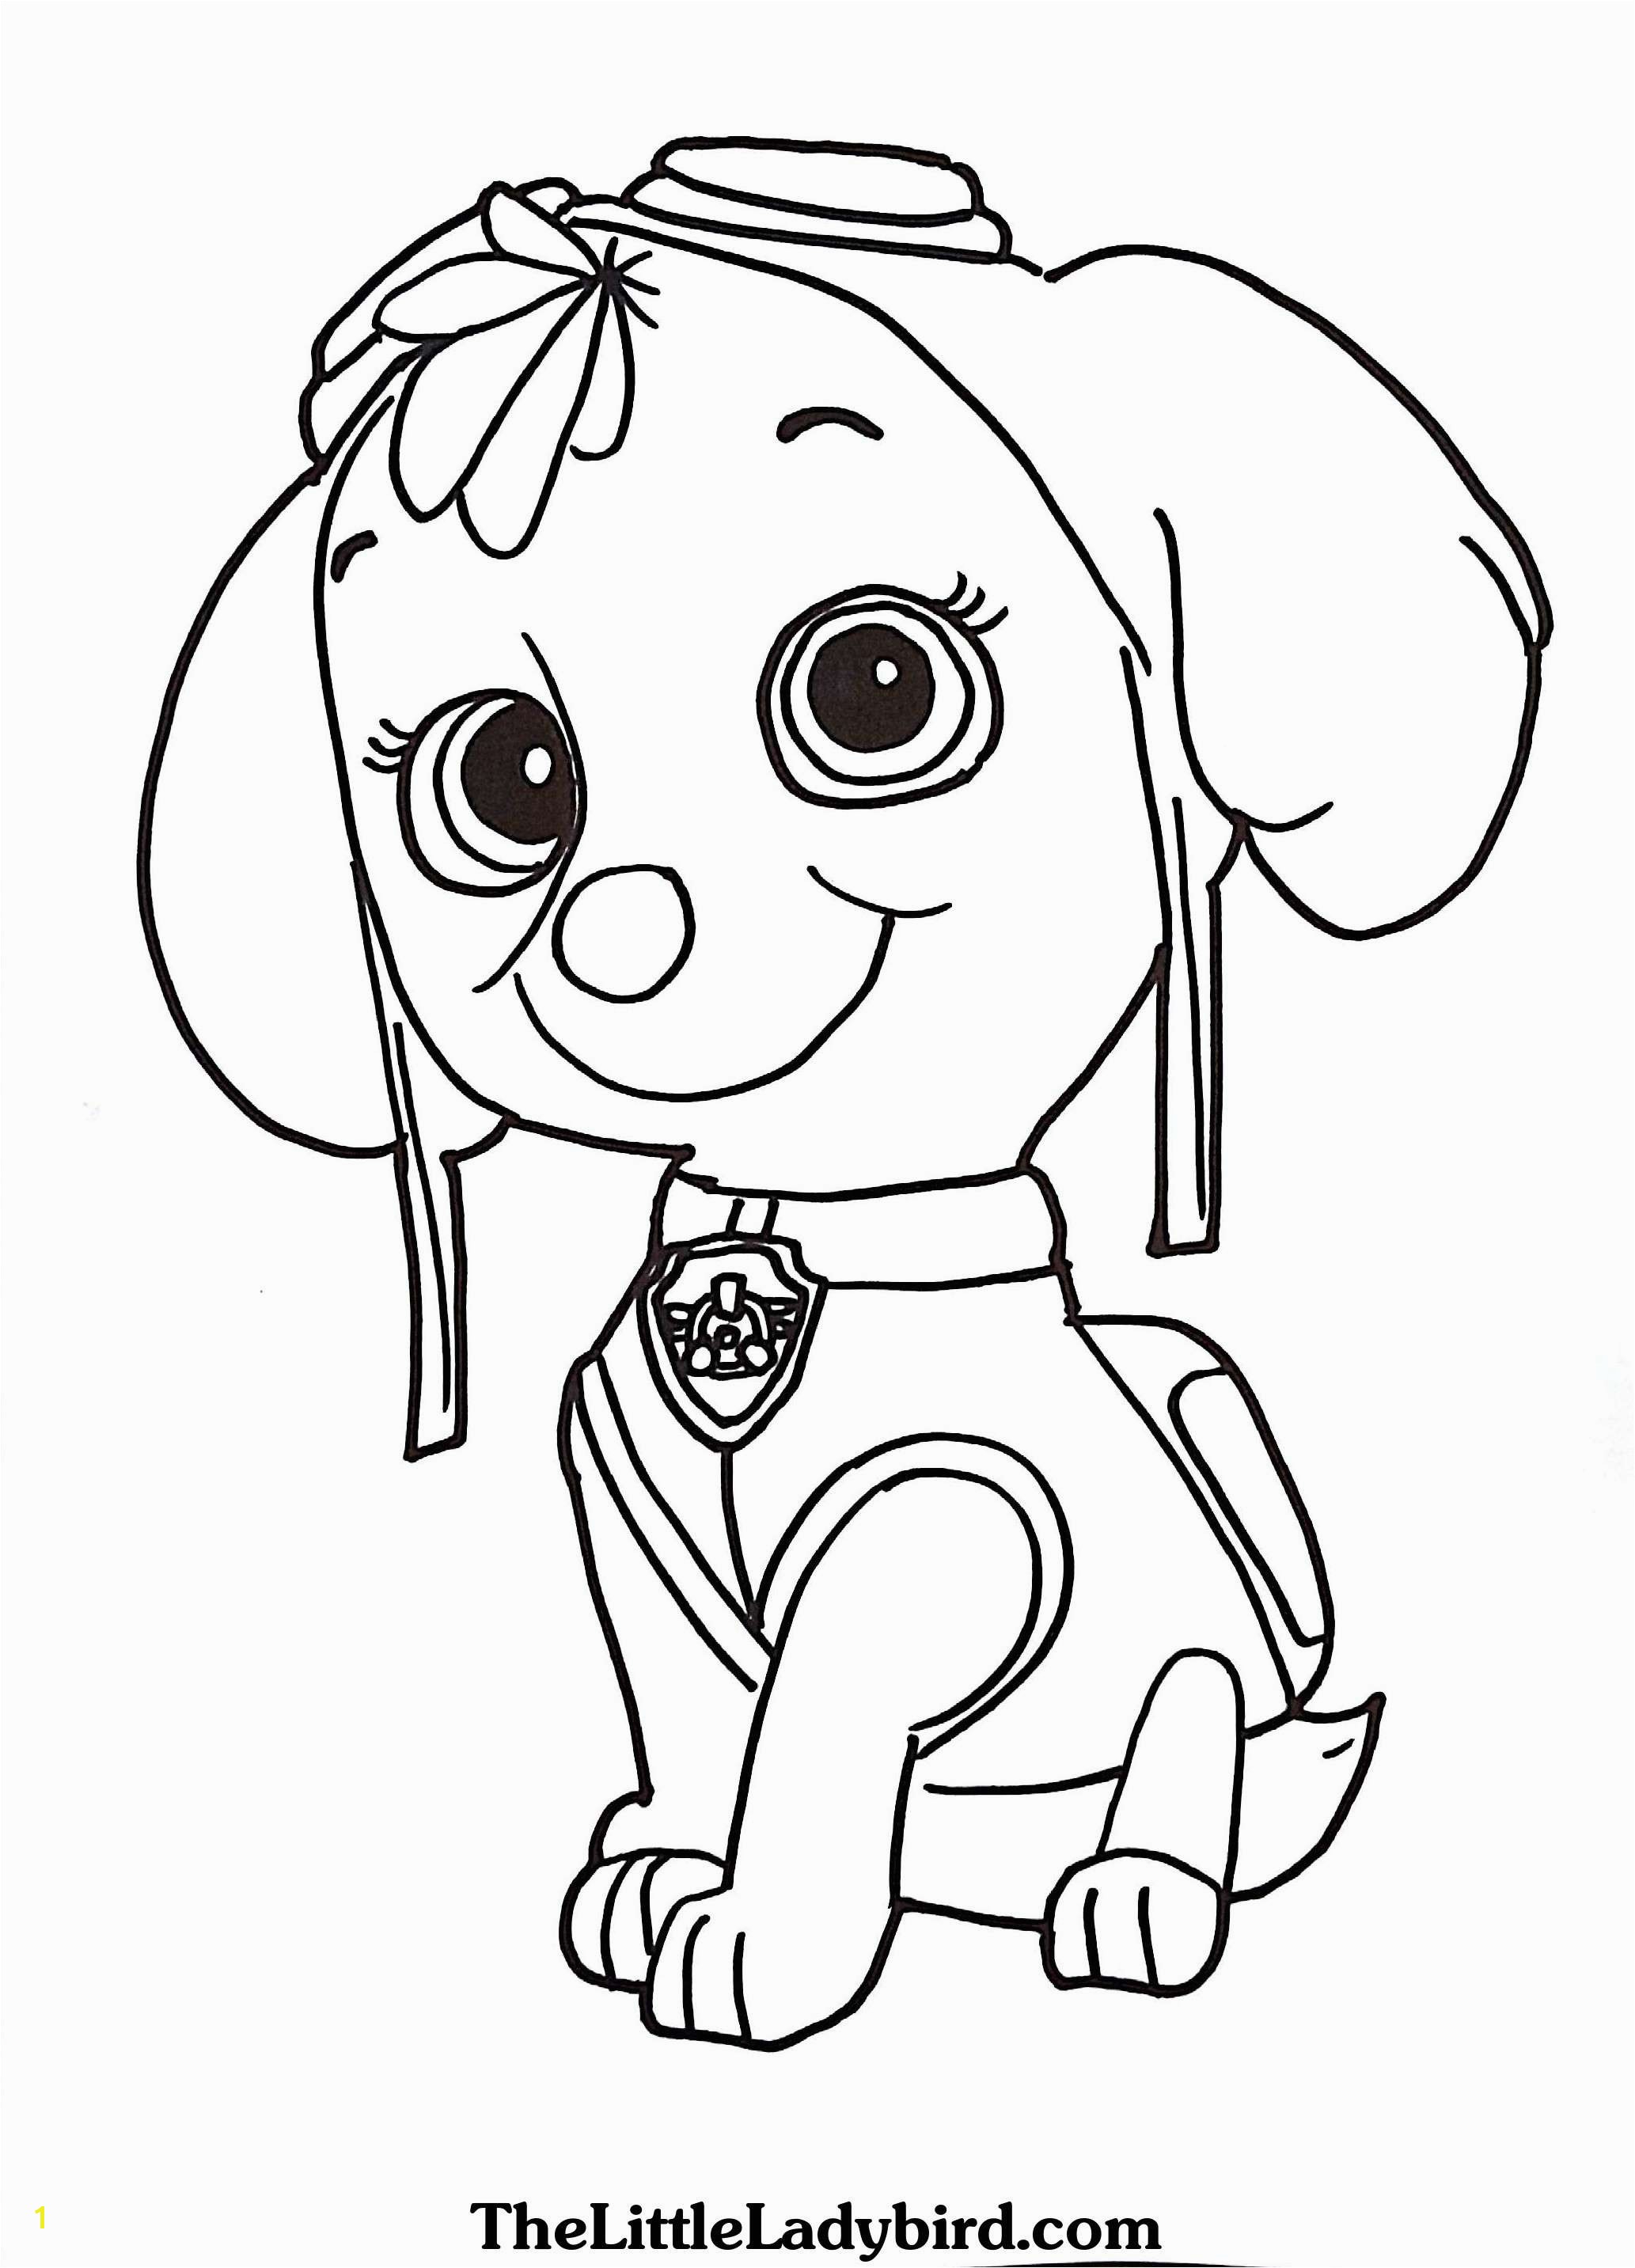 Skye Paw Patrol Coloring Pages Coloring Pages Paw Patrol Coloring Pages Coloring Pages